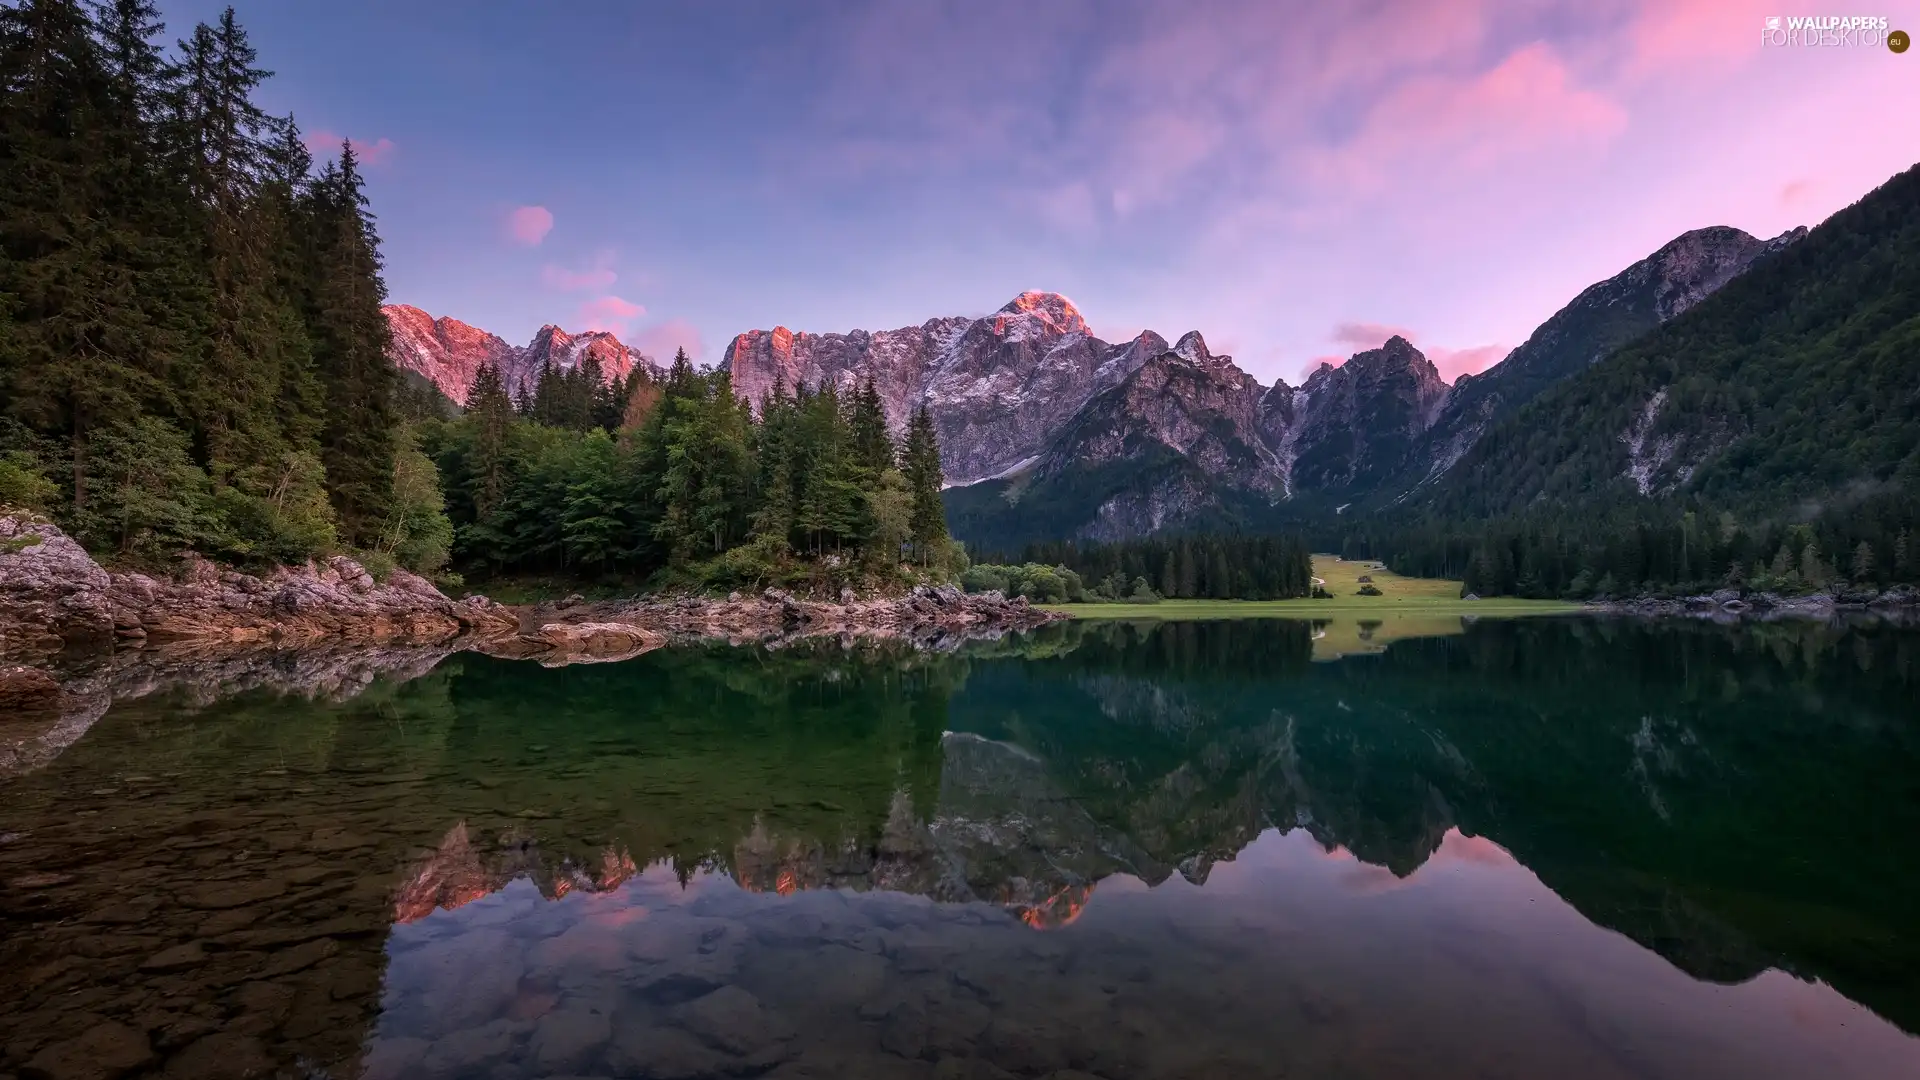 Julian Alps, Mountains, Fusine Lake, forest, reflection, Italy, viewes, clouds, trees